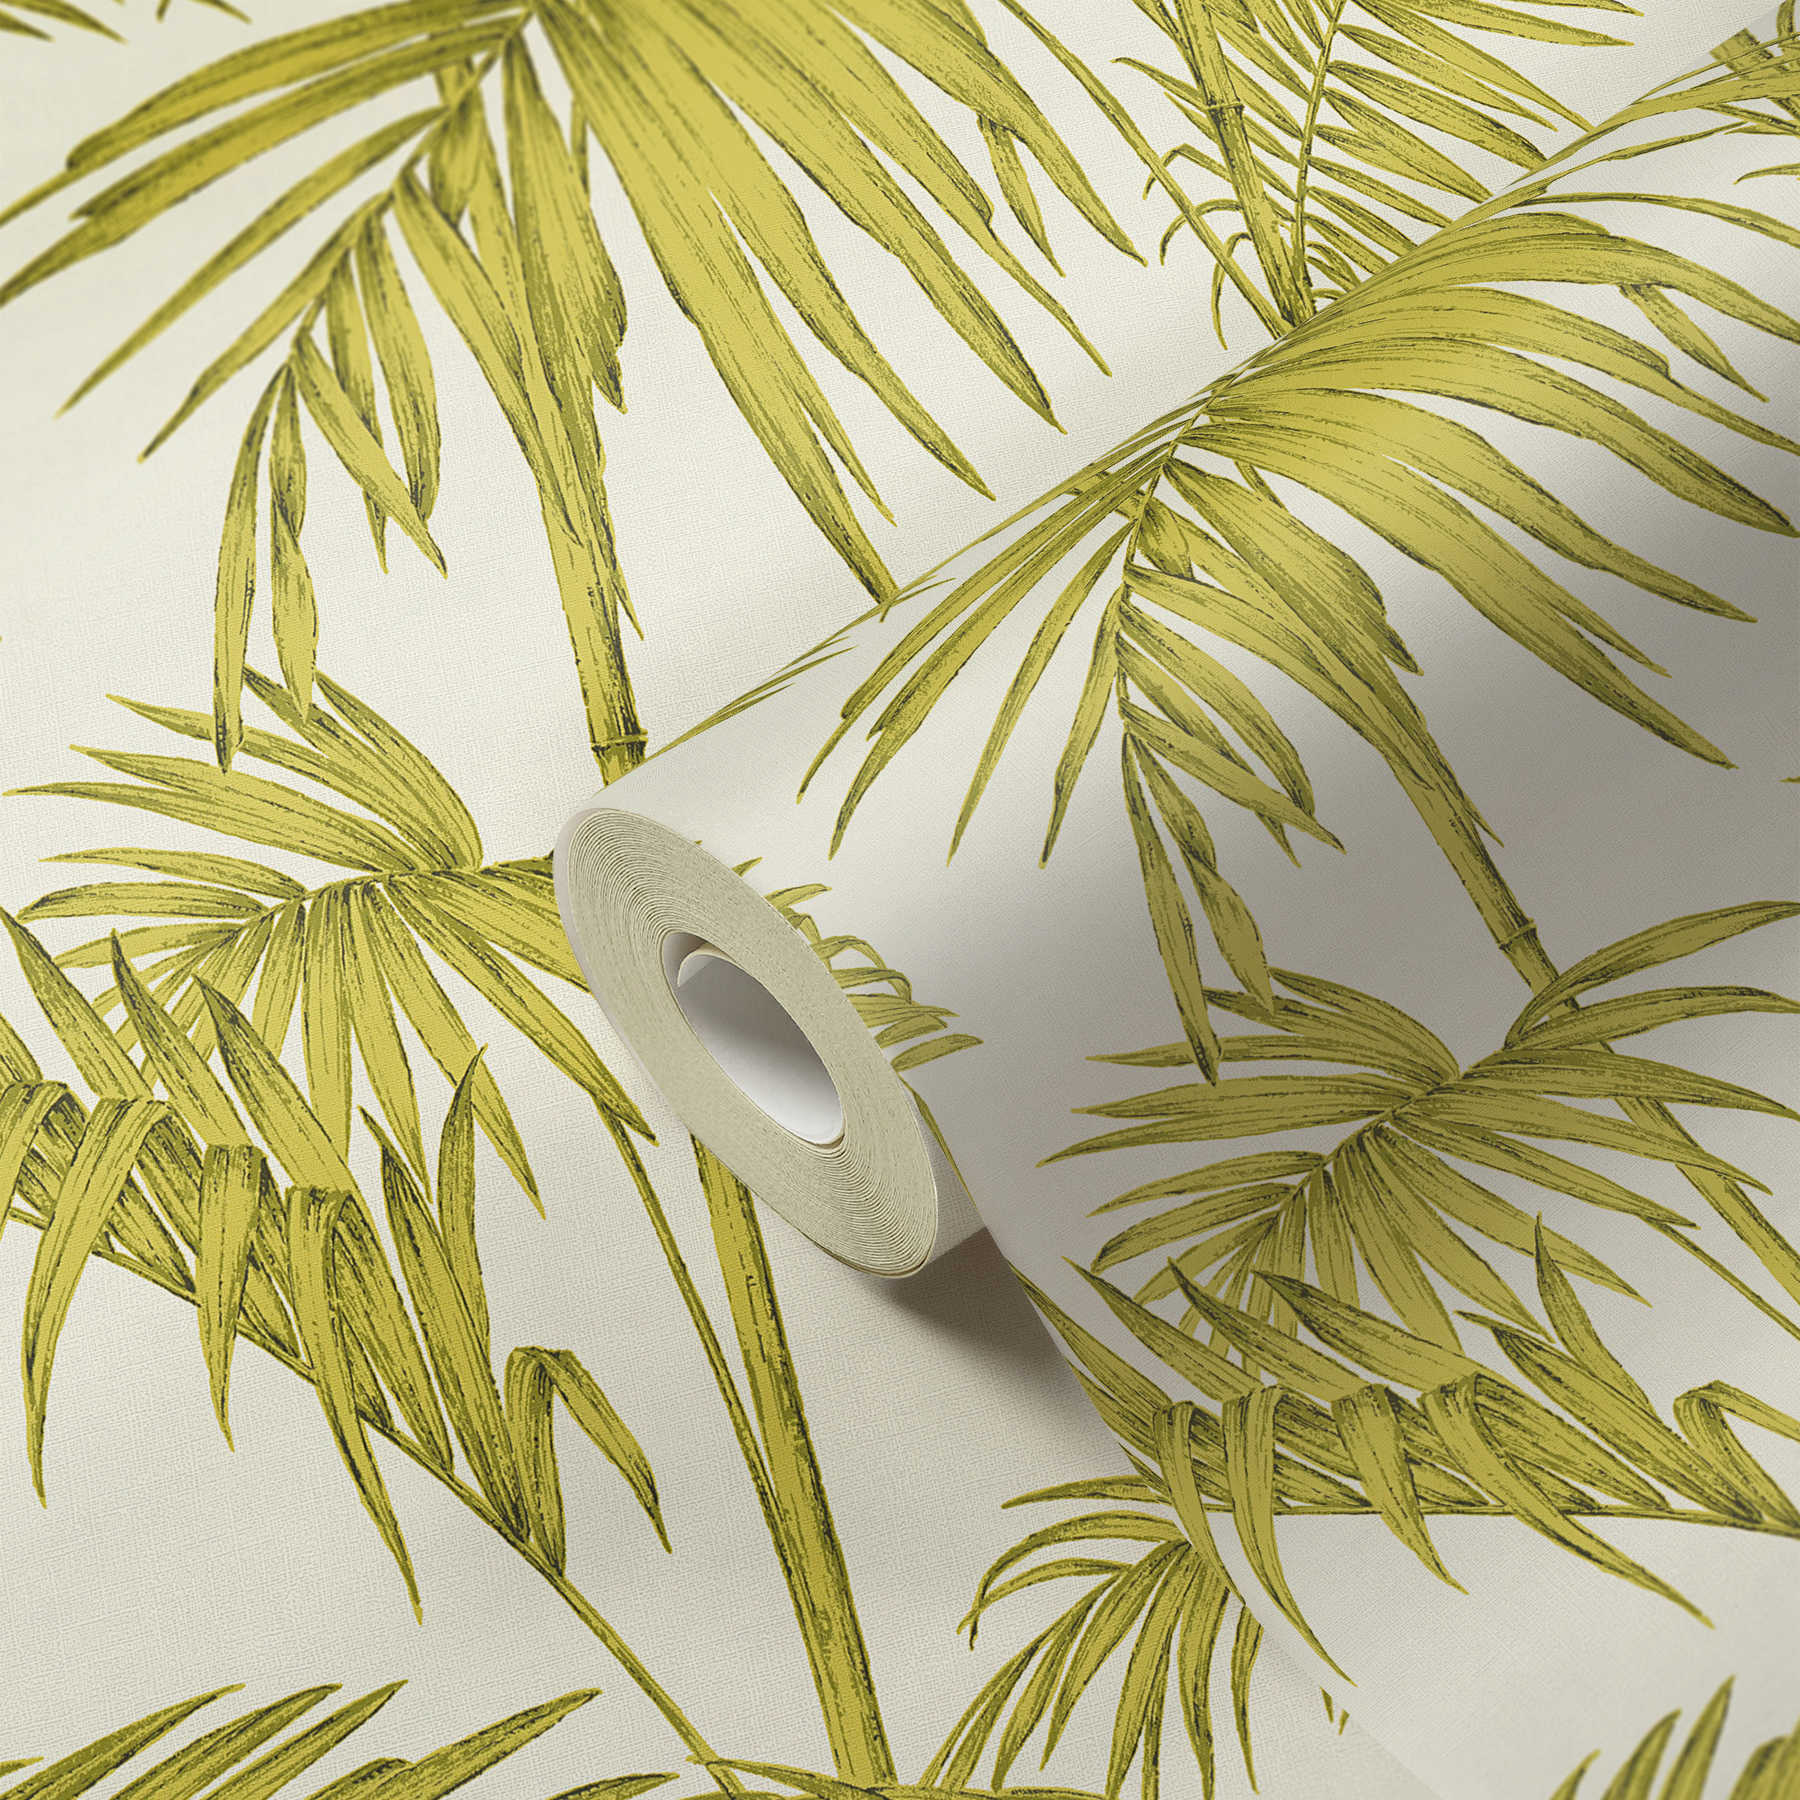             Nature wallpaper palm leaves, bamboo - green, cream
        